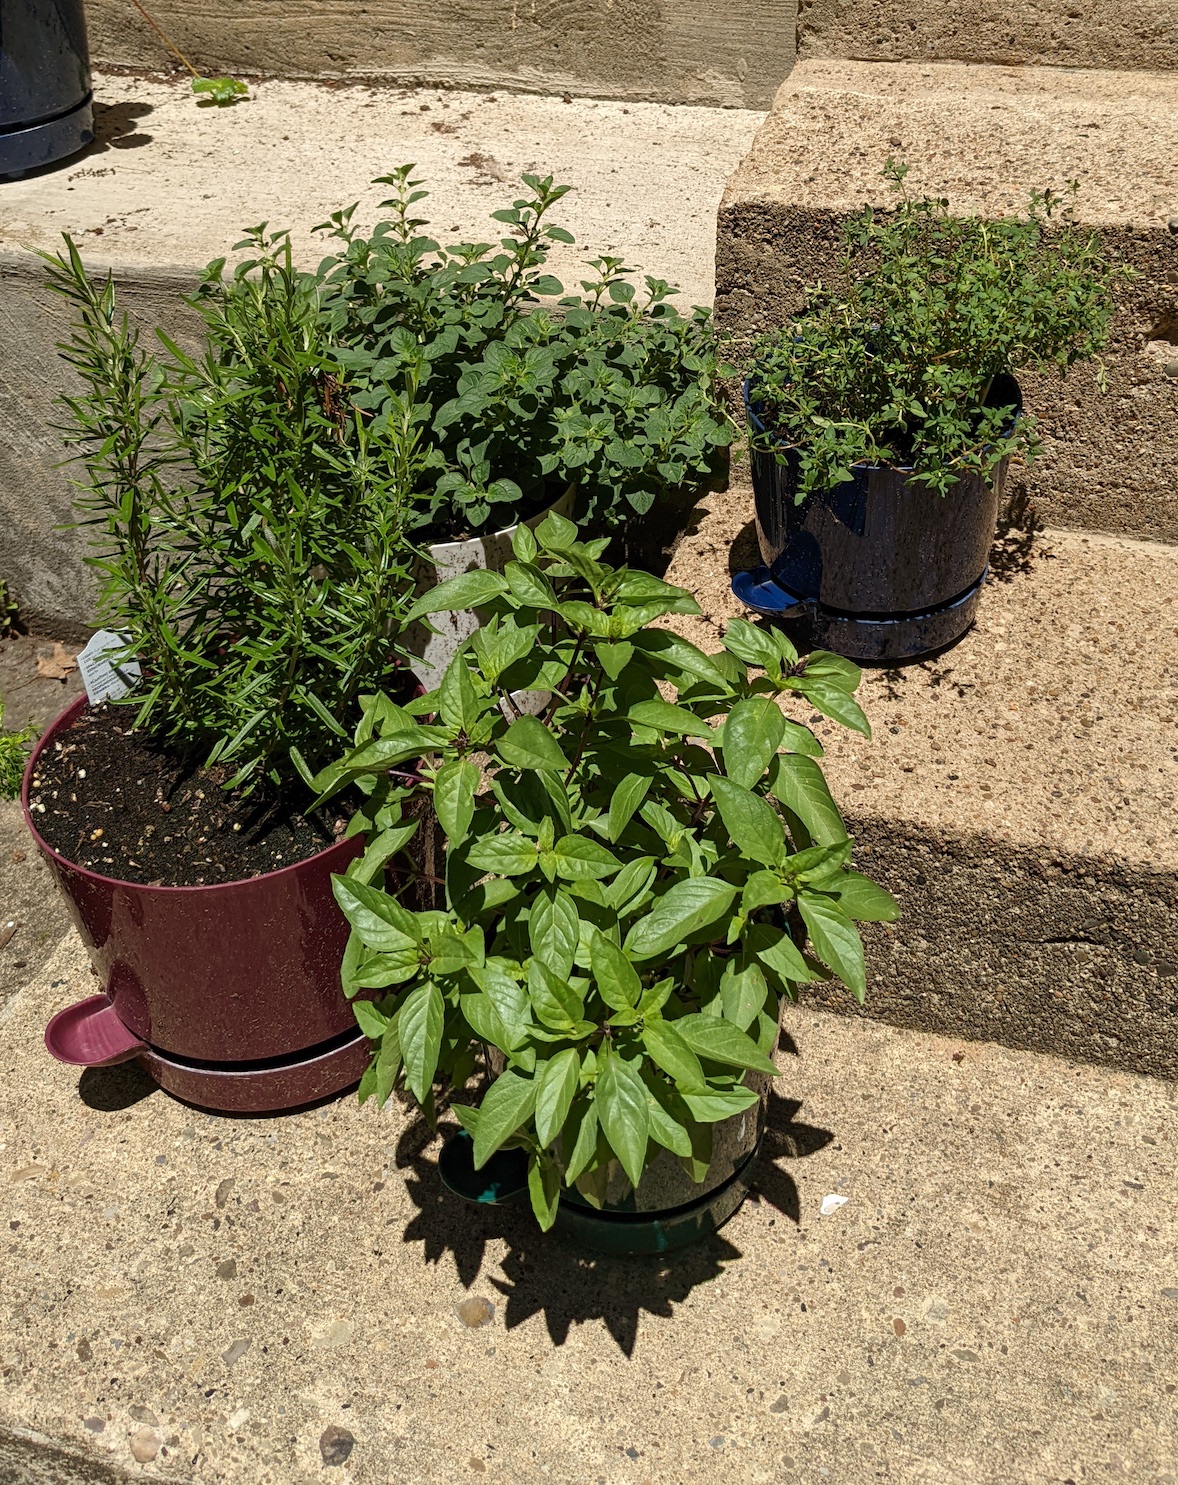 lush Thai basil in front, also rosemary, oregano, and thyme